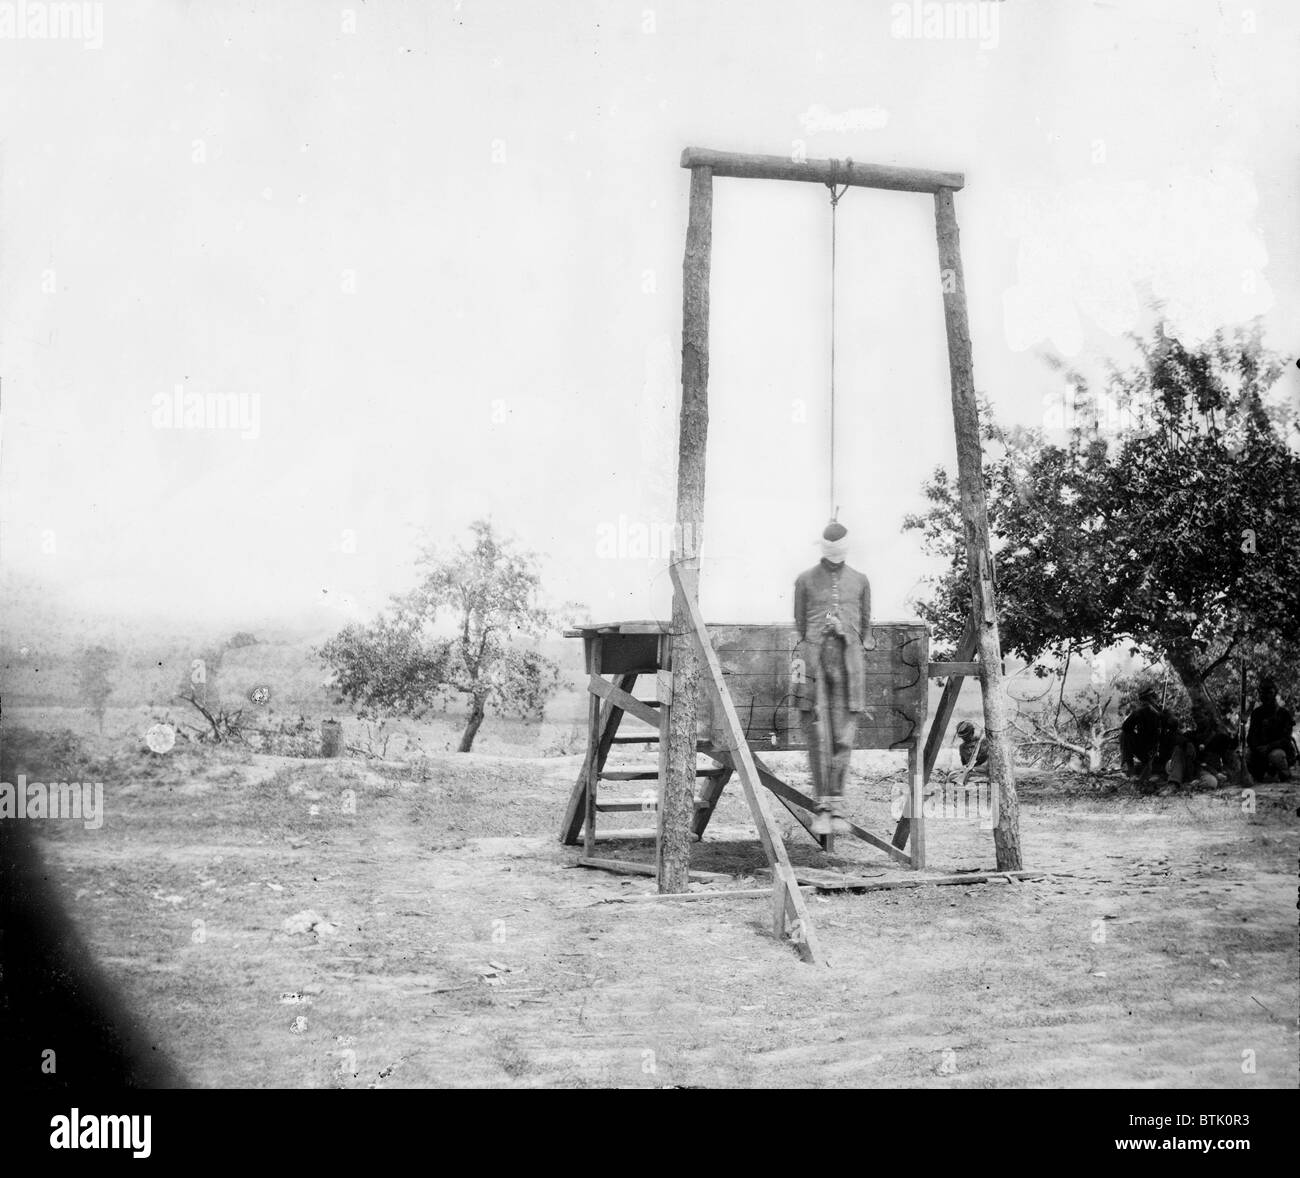 The Civil War, an executed African American man, title: 'The hanged body of William Johnson, A negro soldier', Jordan's Farm, Petersburg, Virginia, photograph, June 20, 1864. Stock Photo